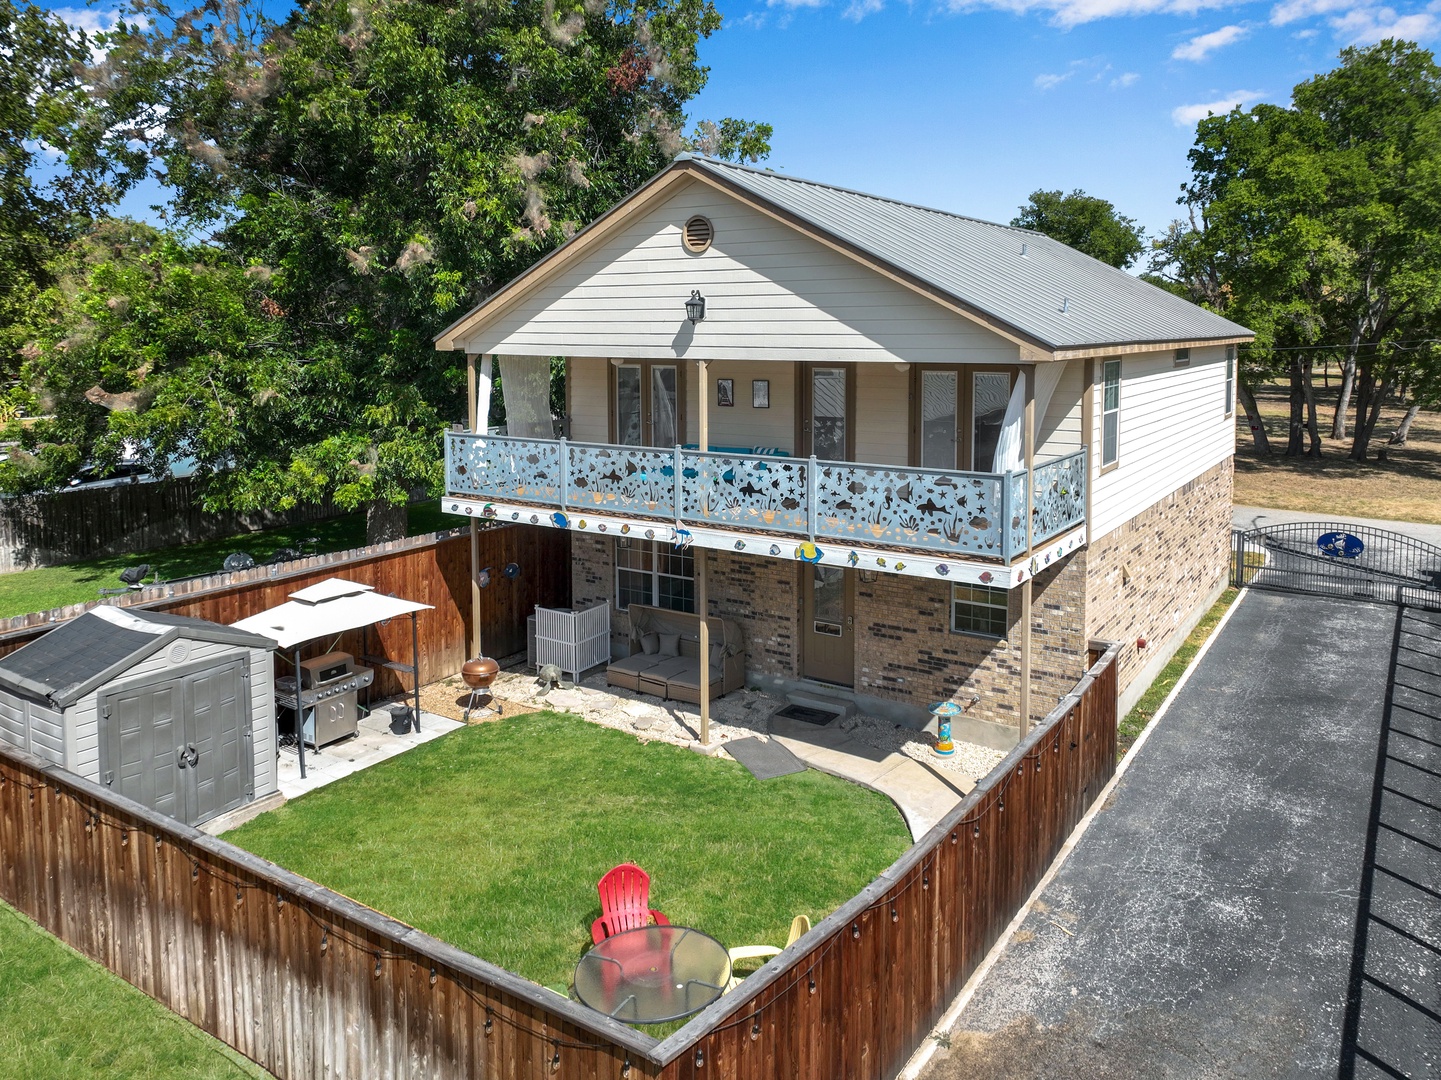 The whole family will love relaxing, dining, & playing in the fenced back yard